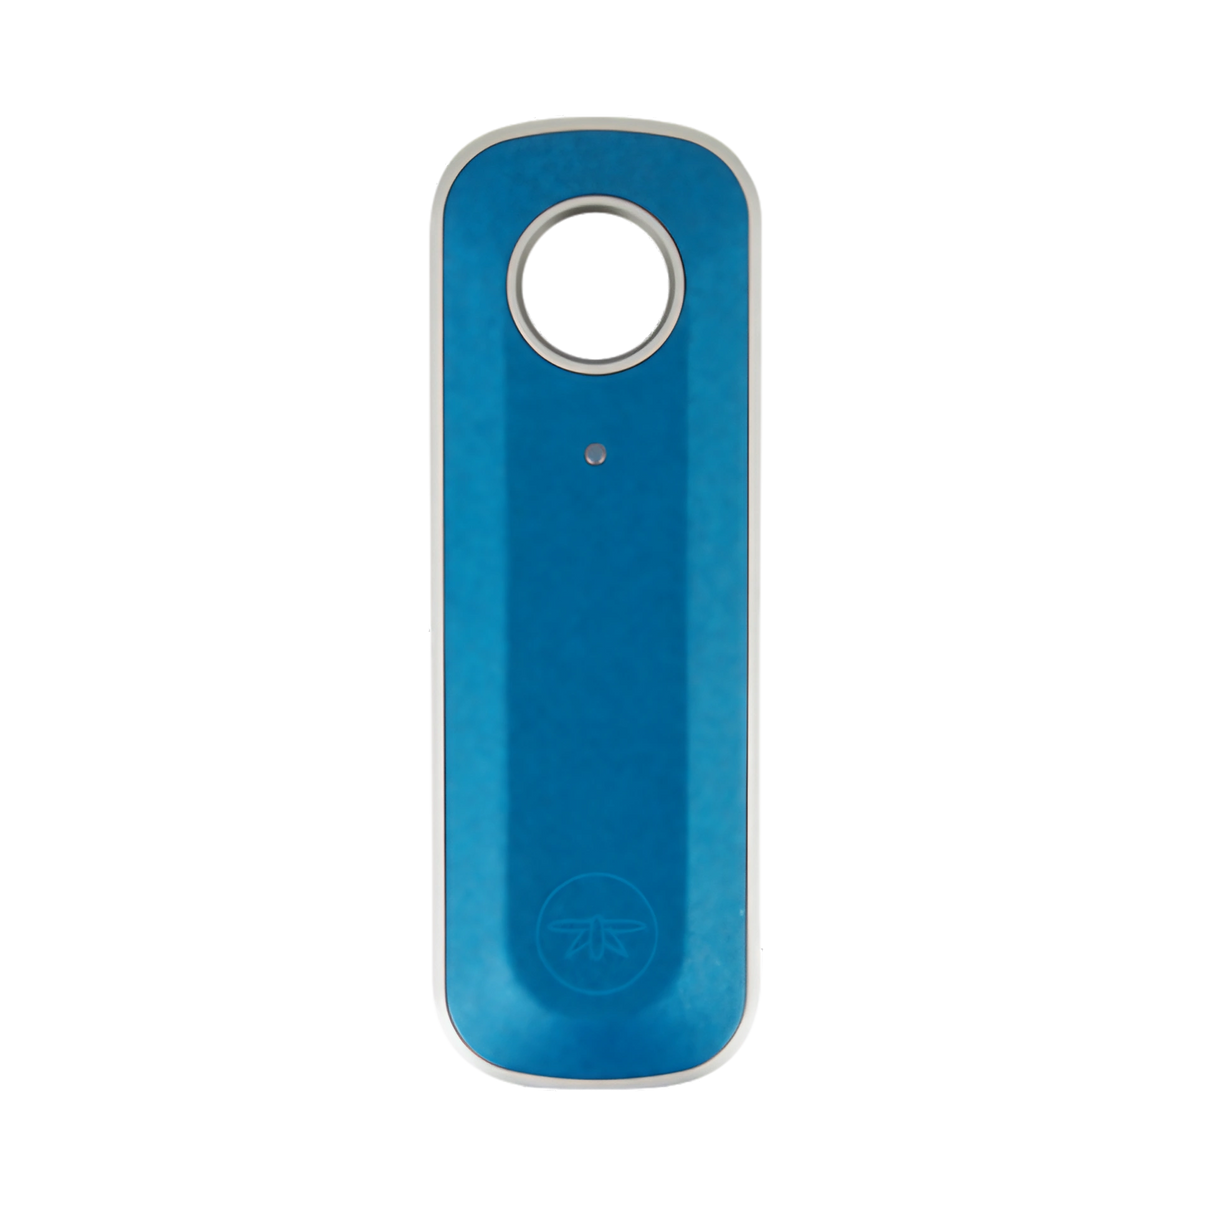 Firefly 2 Top Lid in Blue - Quartz Material for Vaporizers, Front View